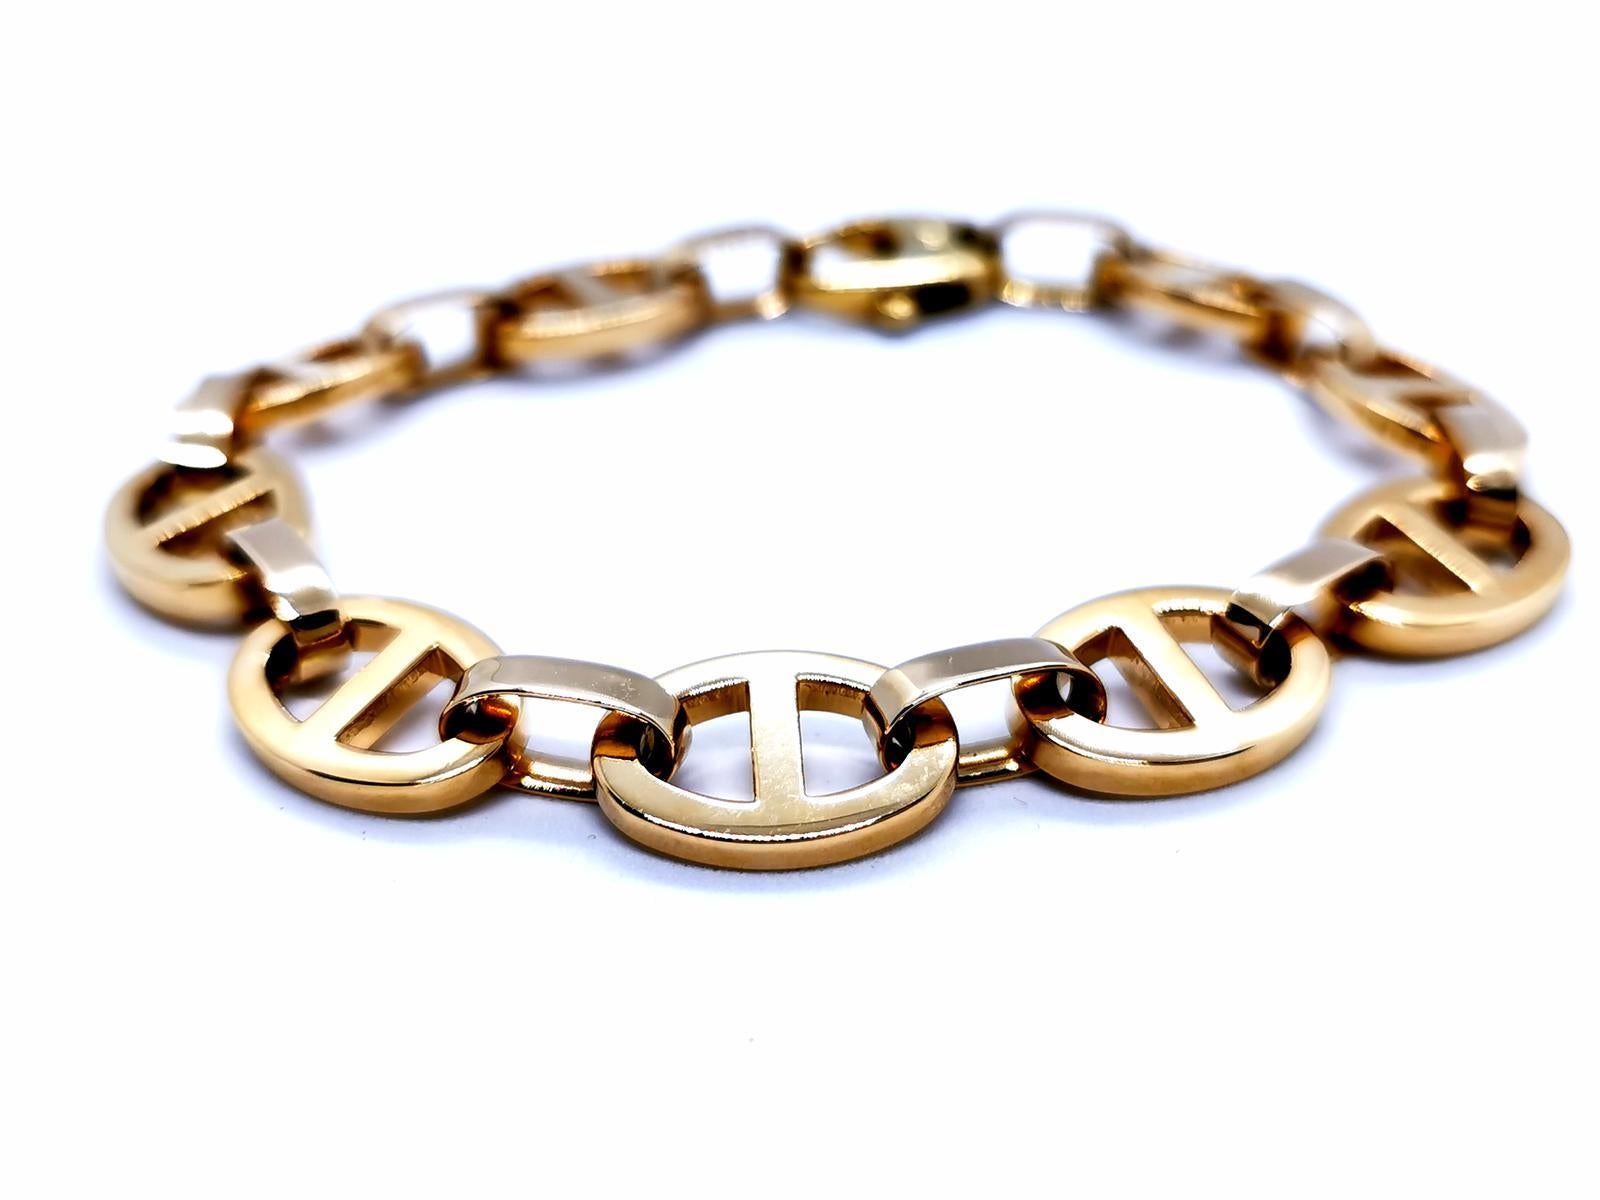 Yellow gold bracelet 750 mils (18 carats). marine mesh. solid. length: 21 cm. width: 1.13 cm. dimensions of the links: 1.65 cm x 1.13 cm. total weight: 42.06 g. punch eagle's head. excellent condition
